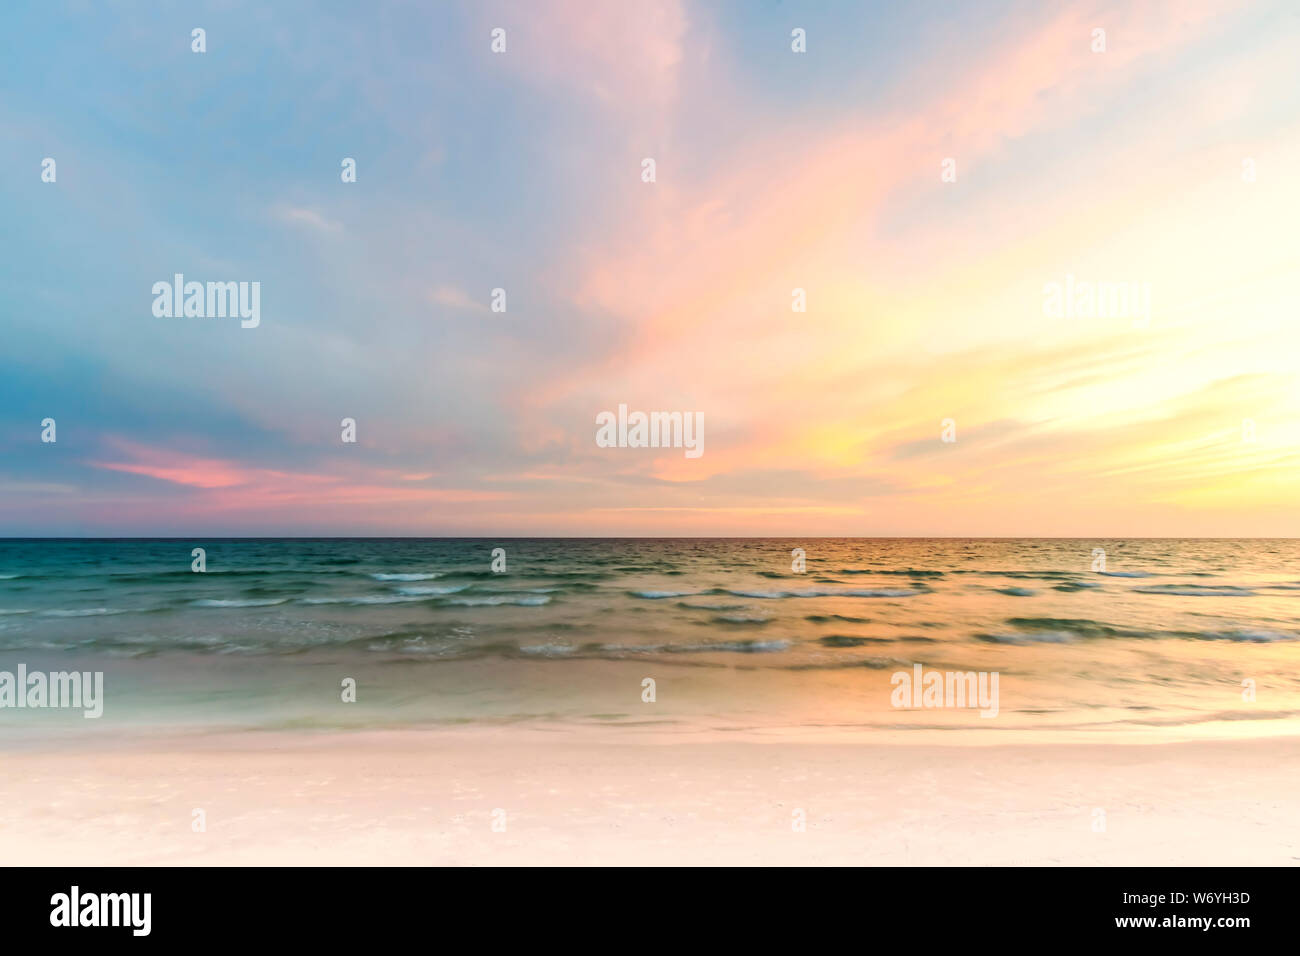 Seascape at sunset in Florida Stock Photo